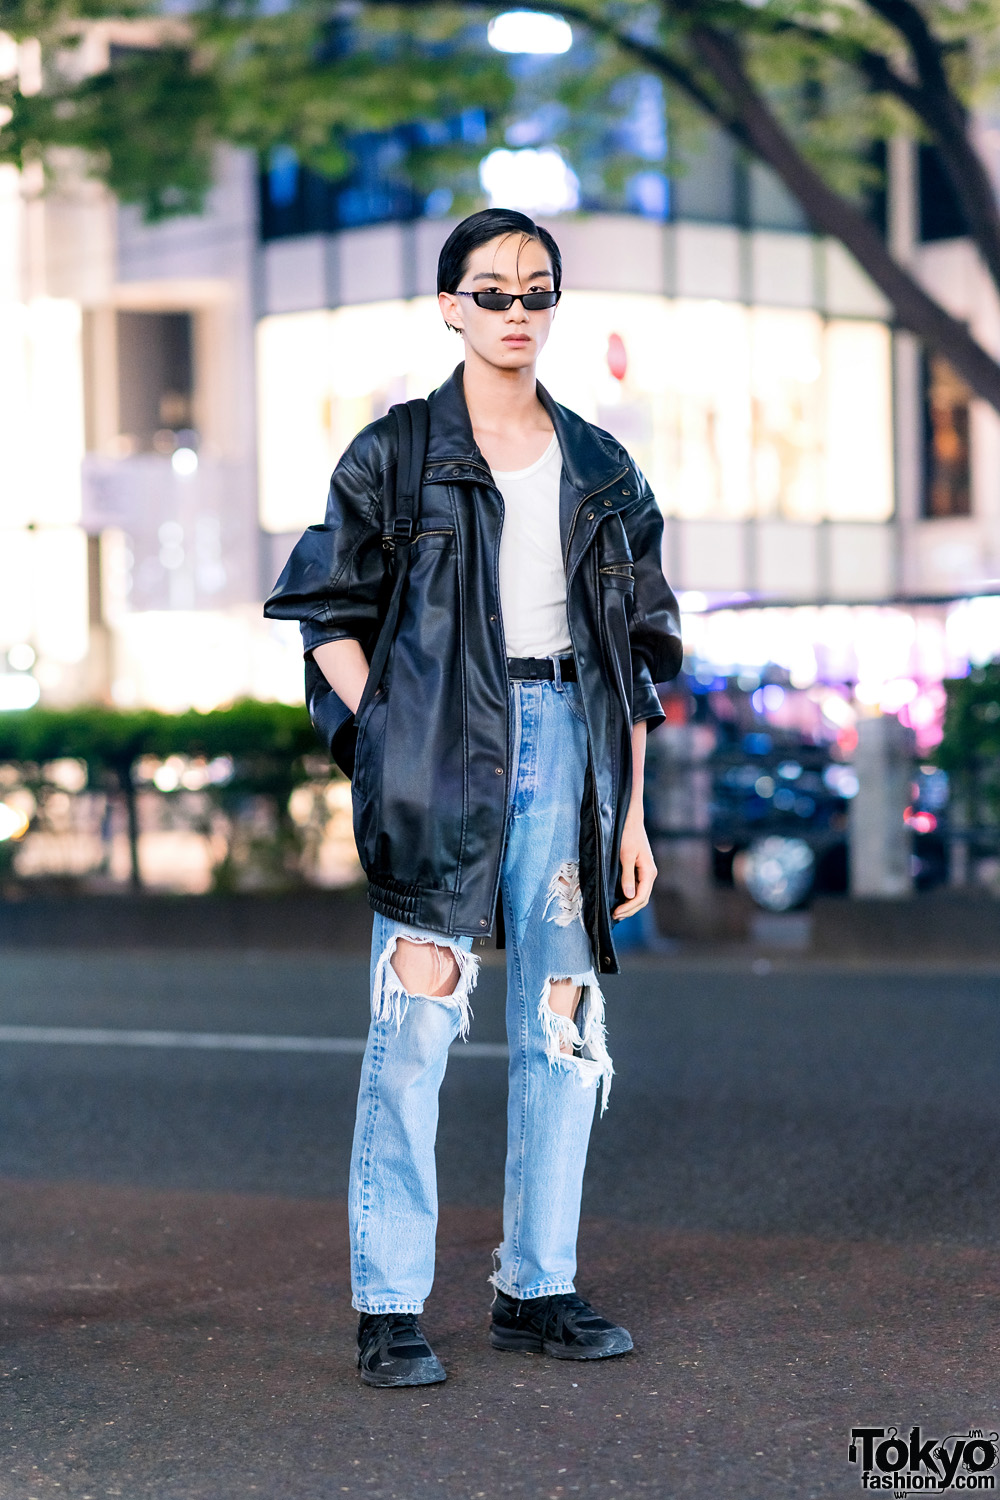 acne ripped jeans